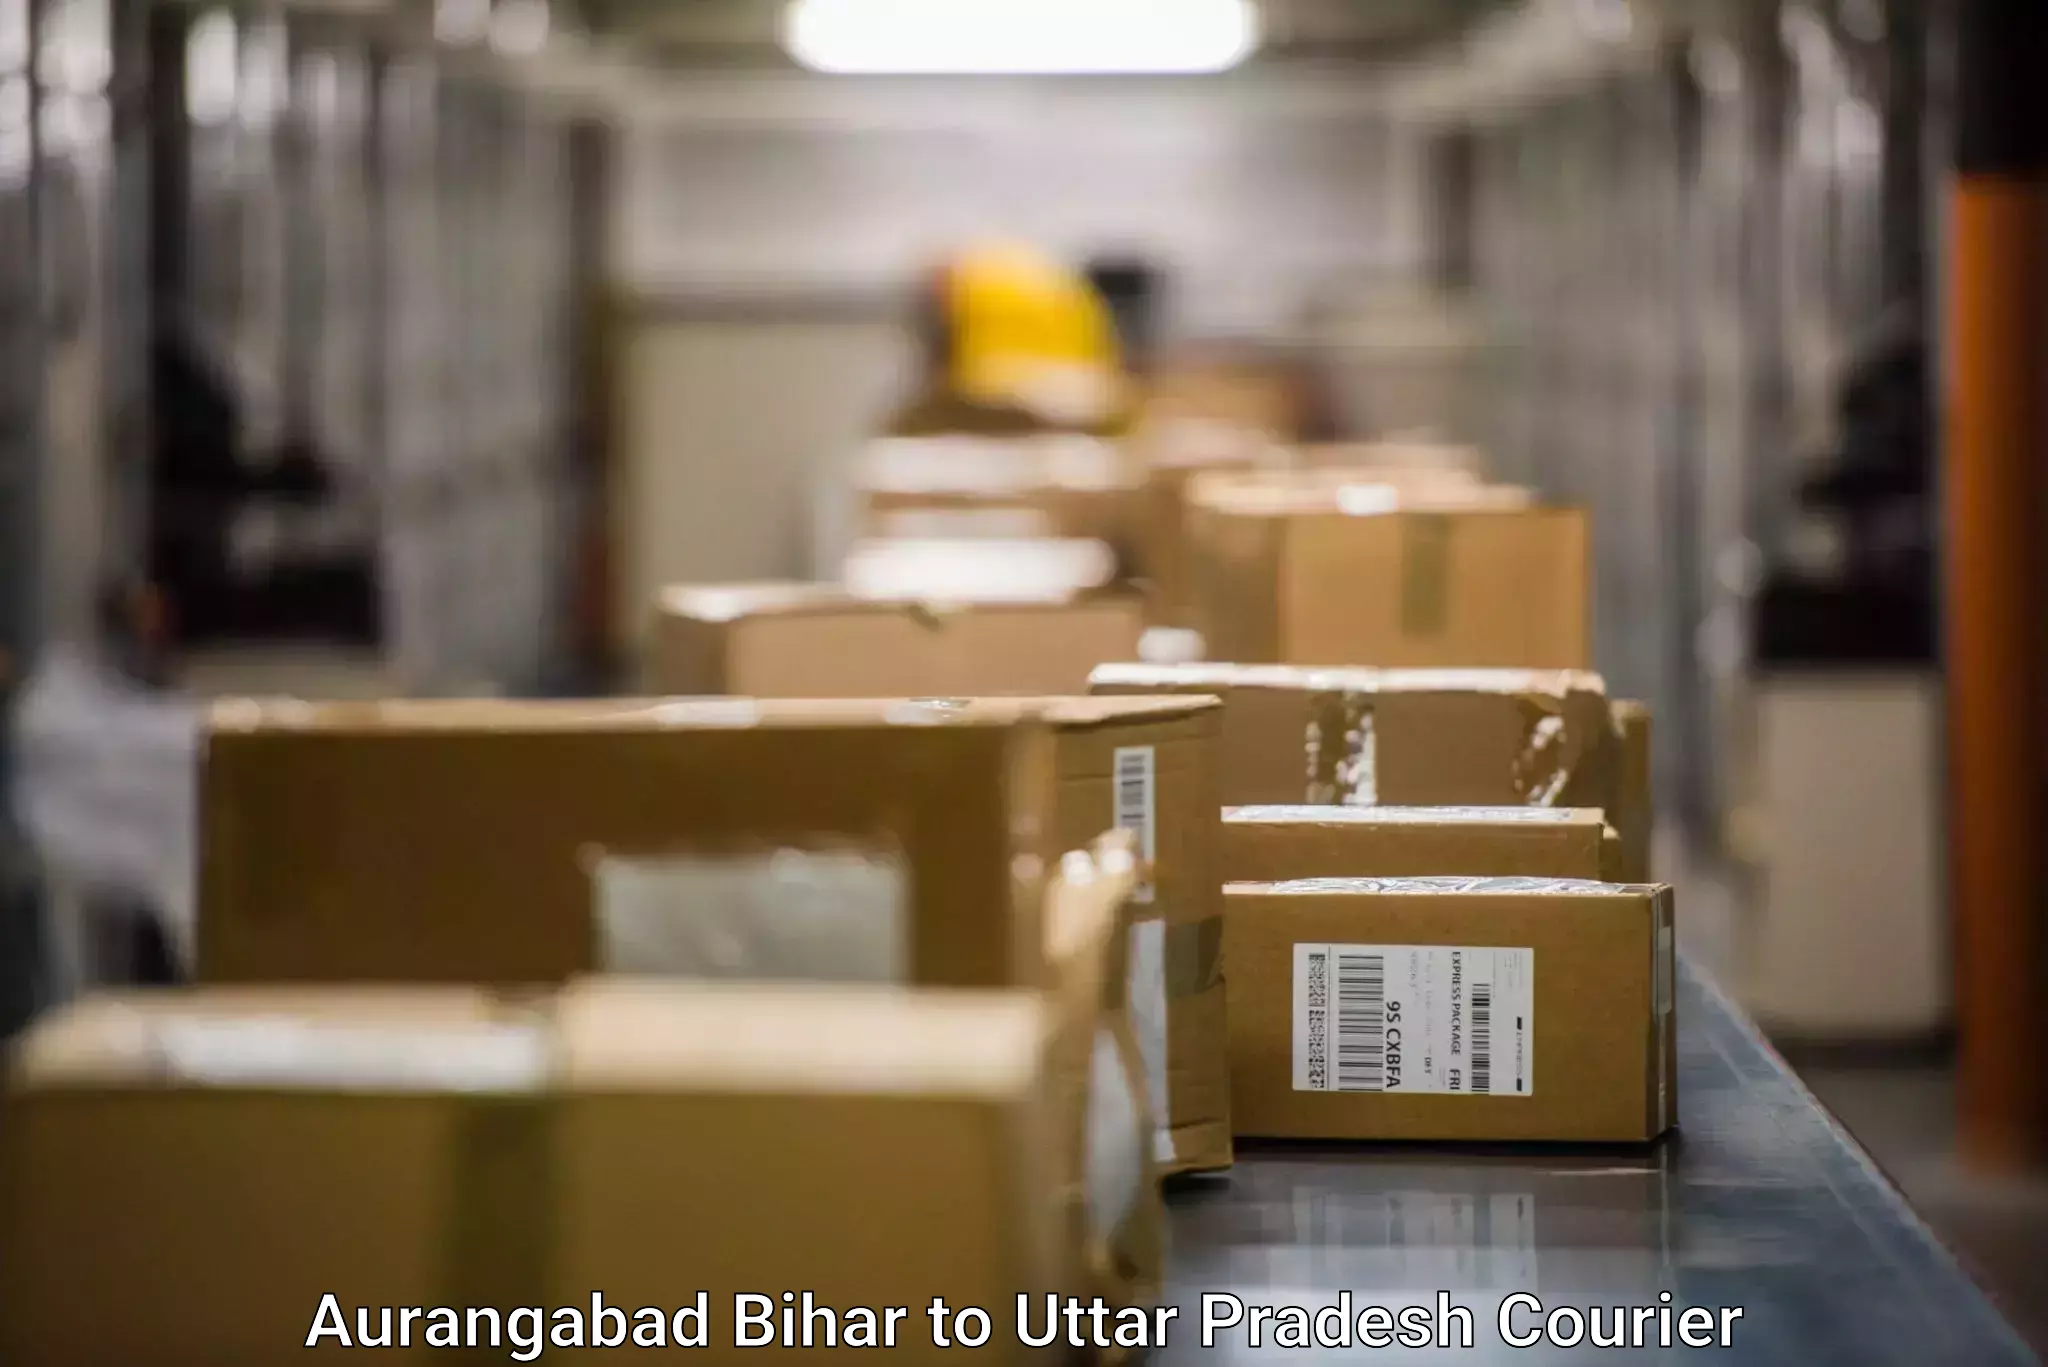 Optimized shipping routes in Aurangabad Bihar to Agra